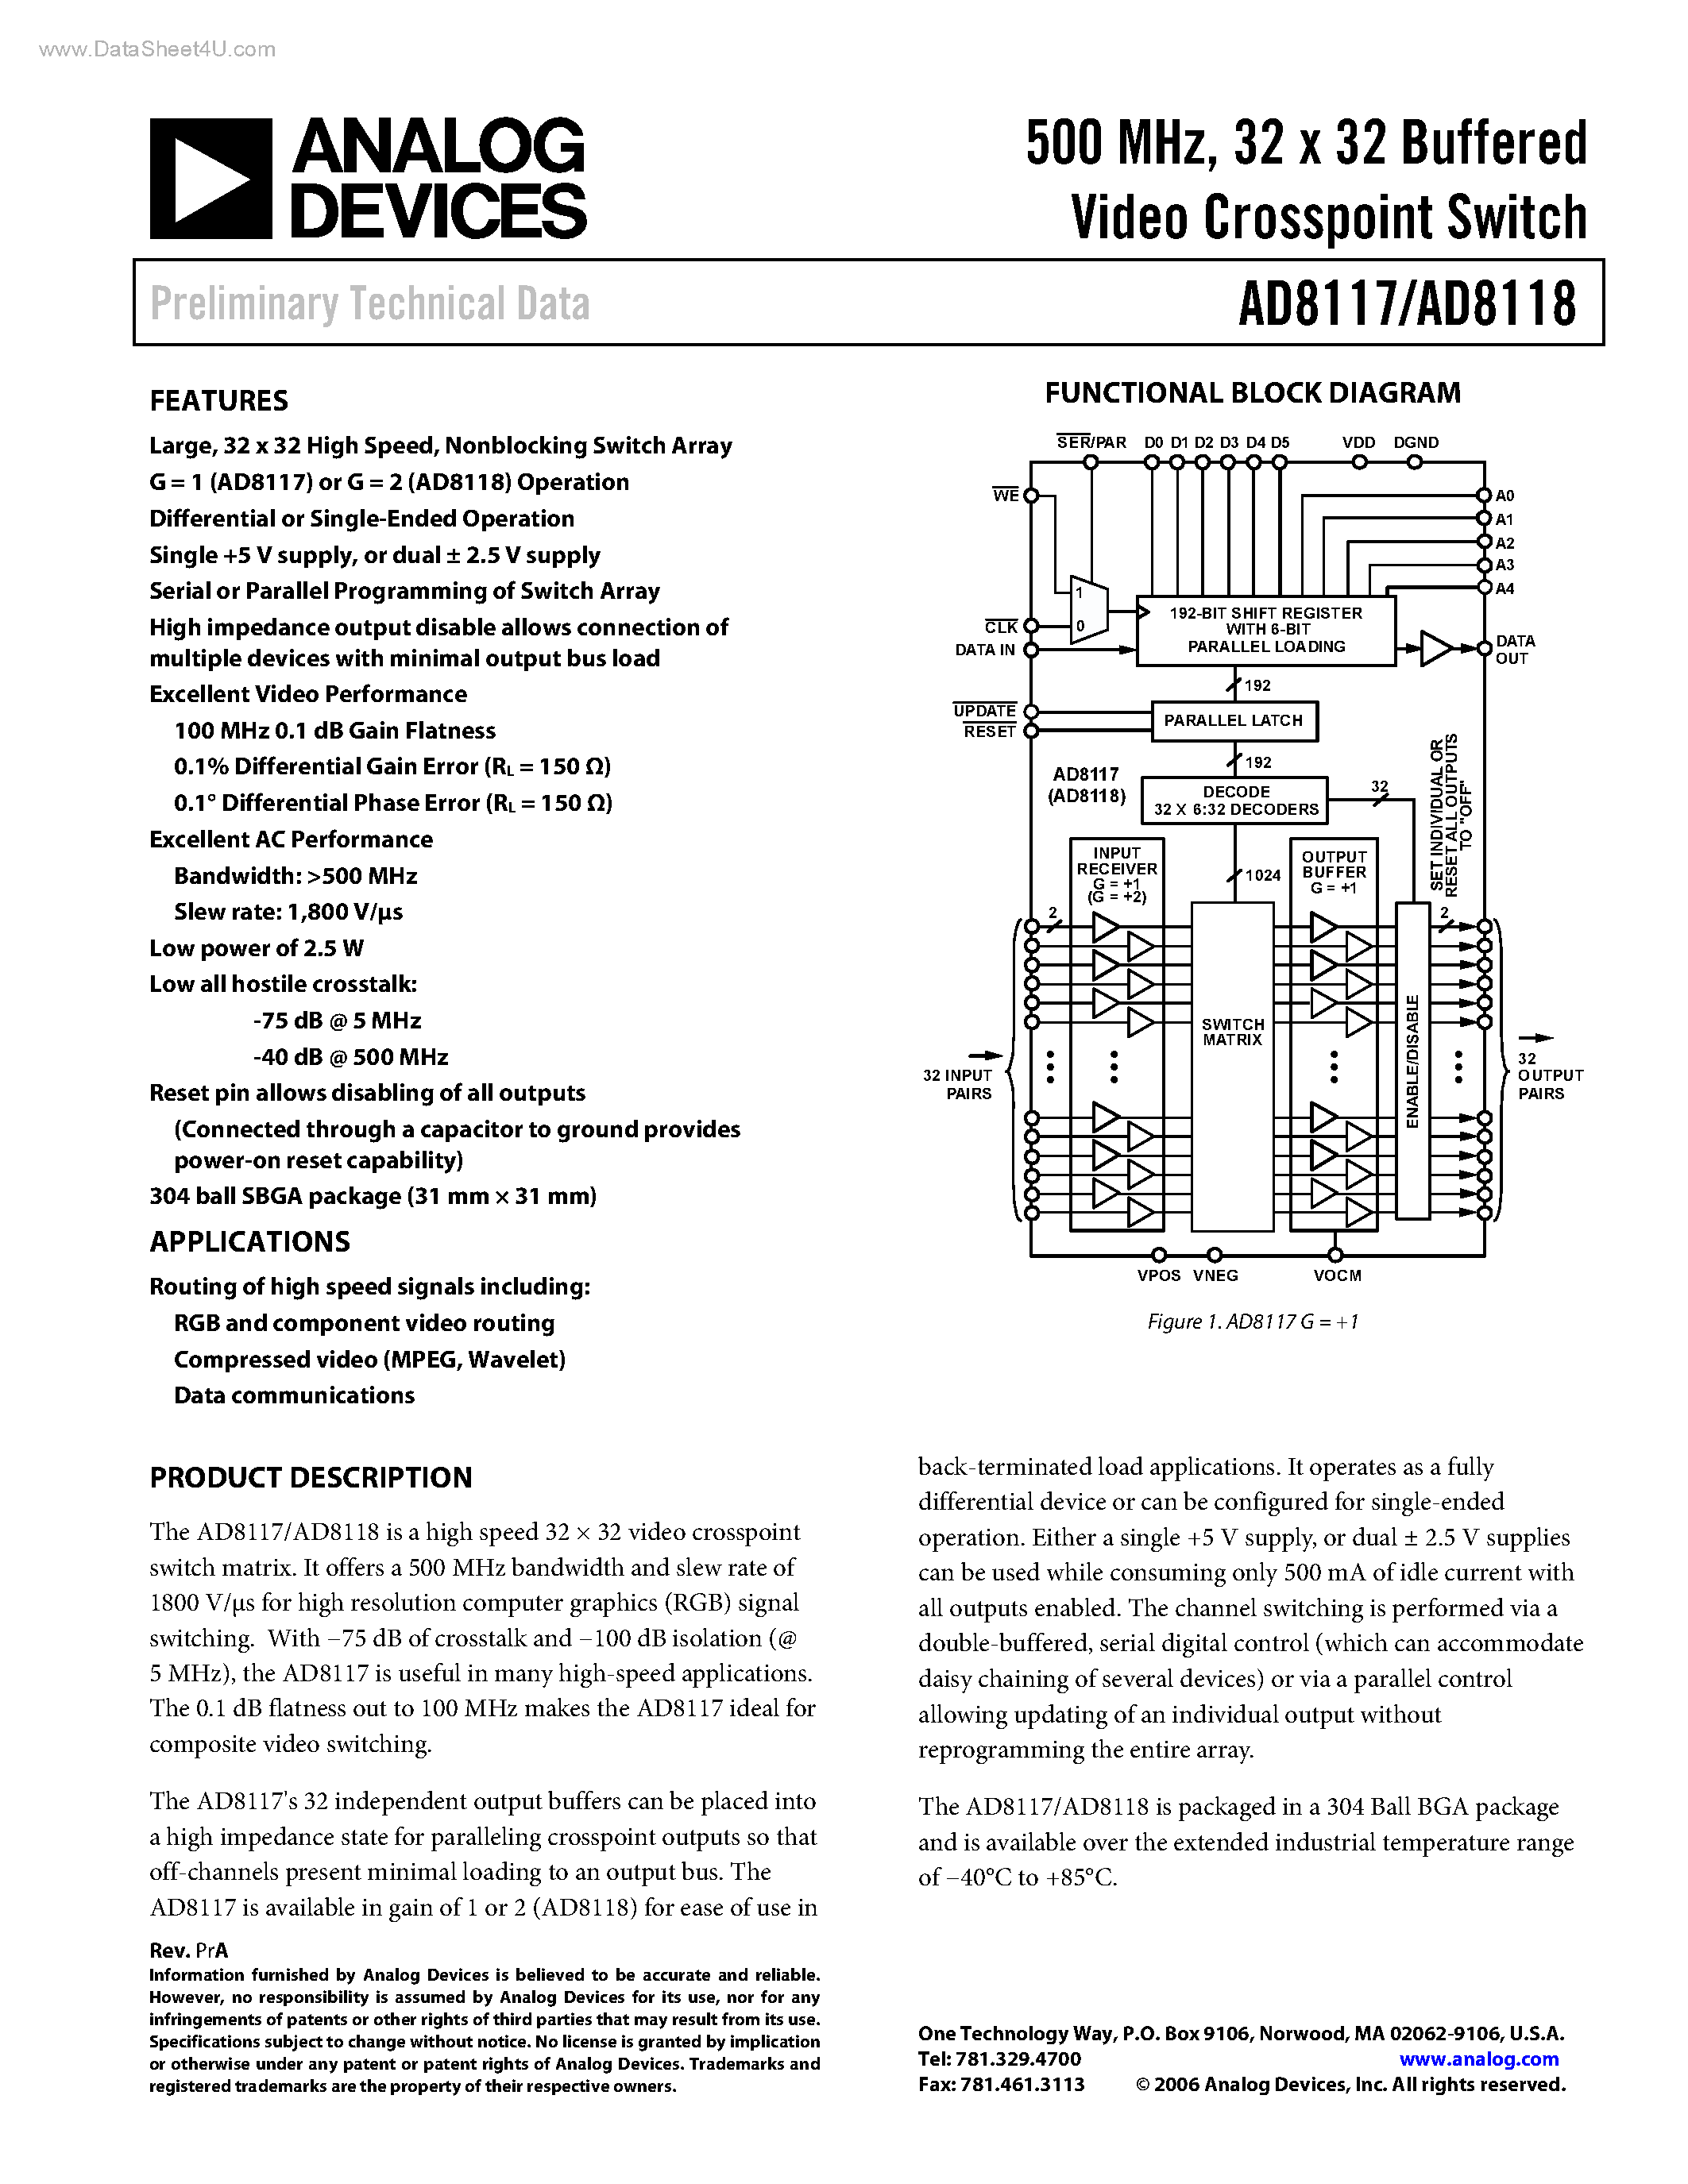 Даташит AD8117 - (AD8117 / AD8118) Video Crosspoint Switch Video Crosspoint Switch страница 1